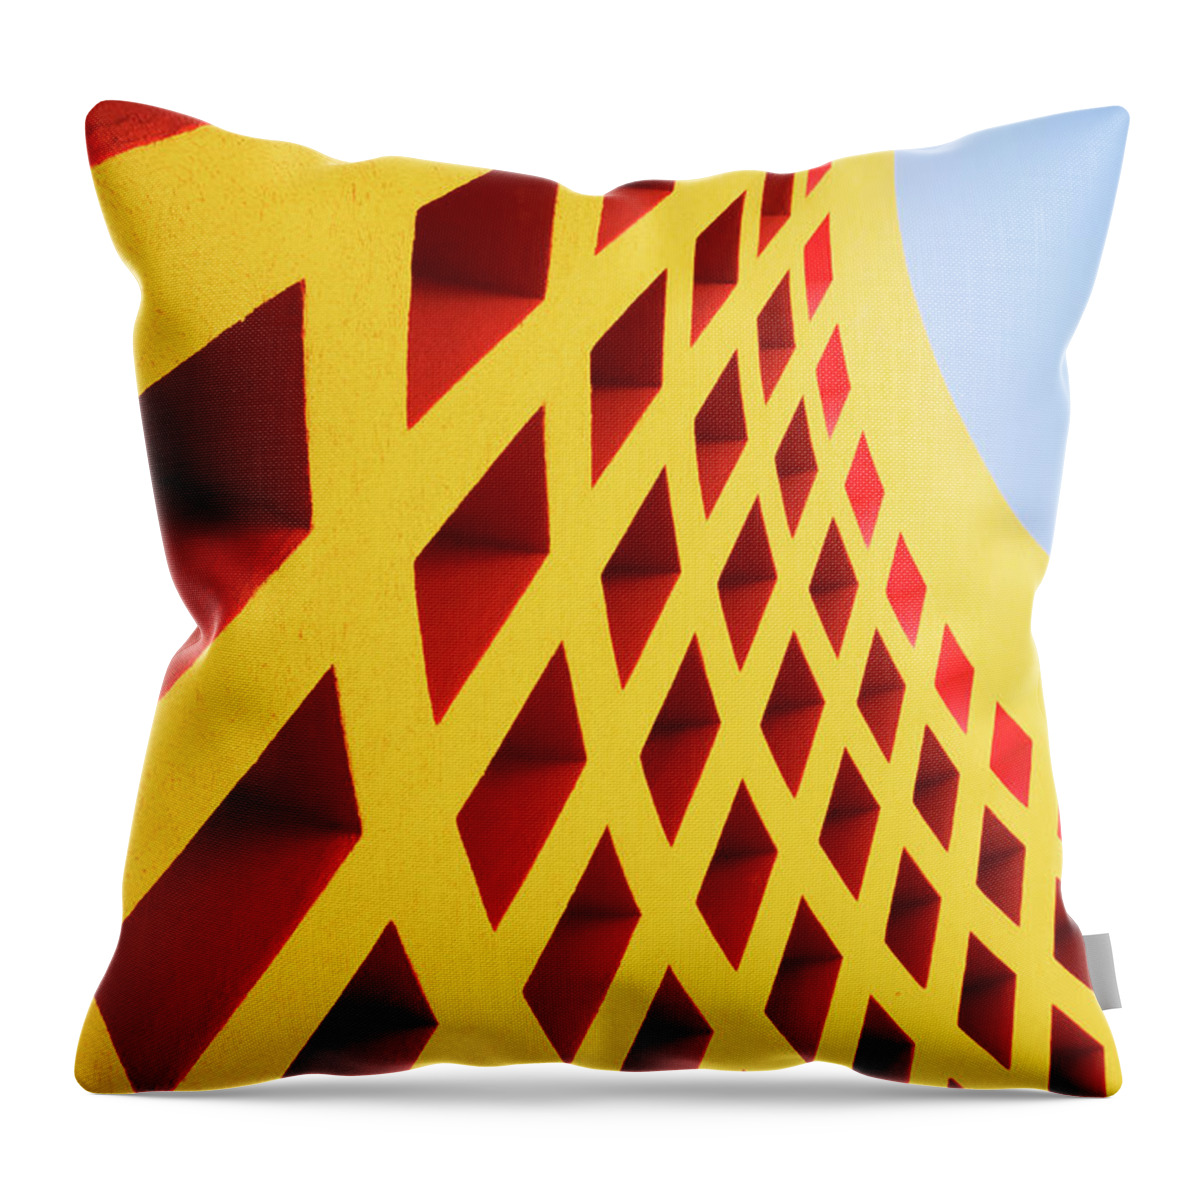 Curve Throw Pillow featuring the photograph Windows In Wall Of Curved, Modern by Pixelchrome Inc